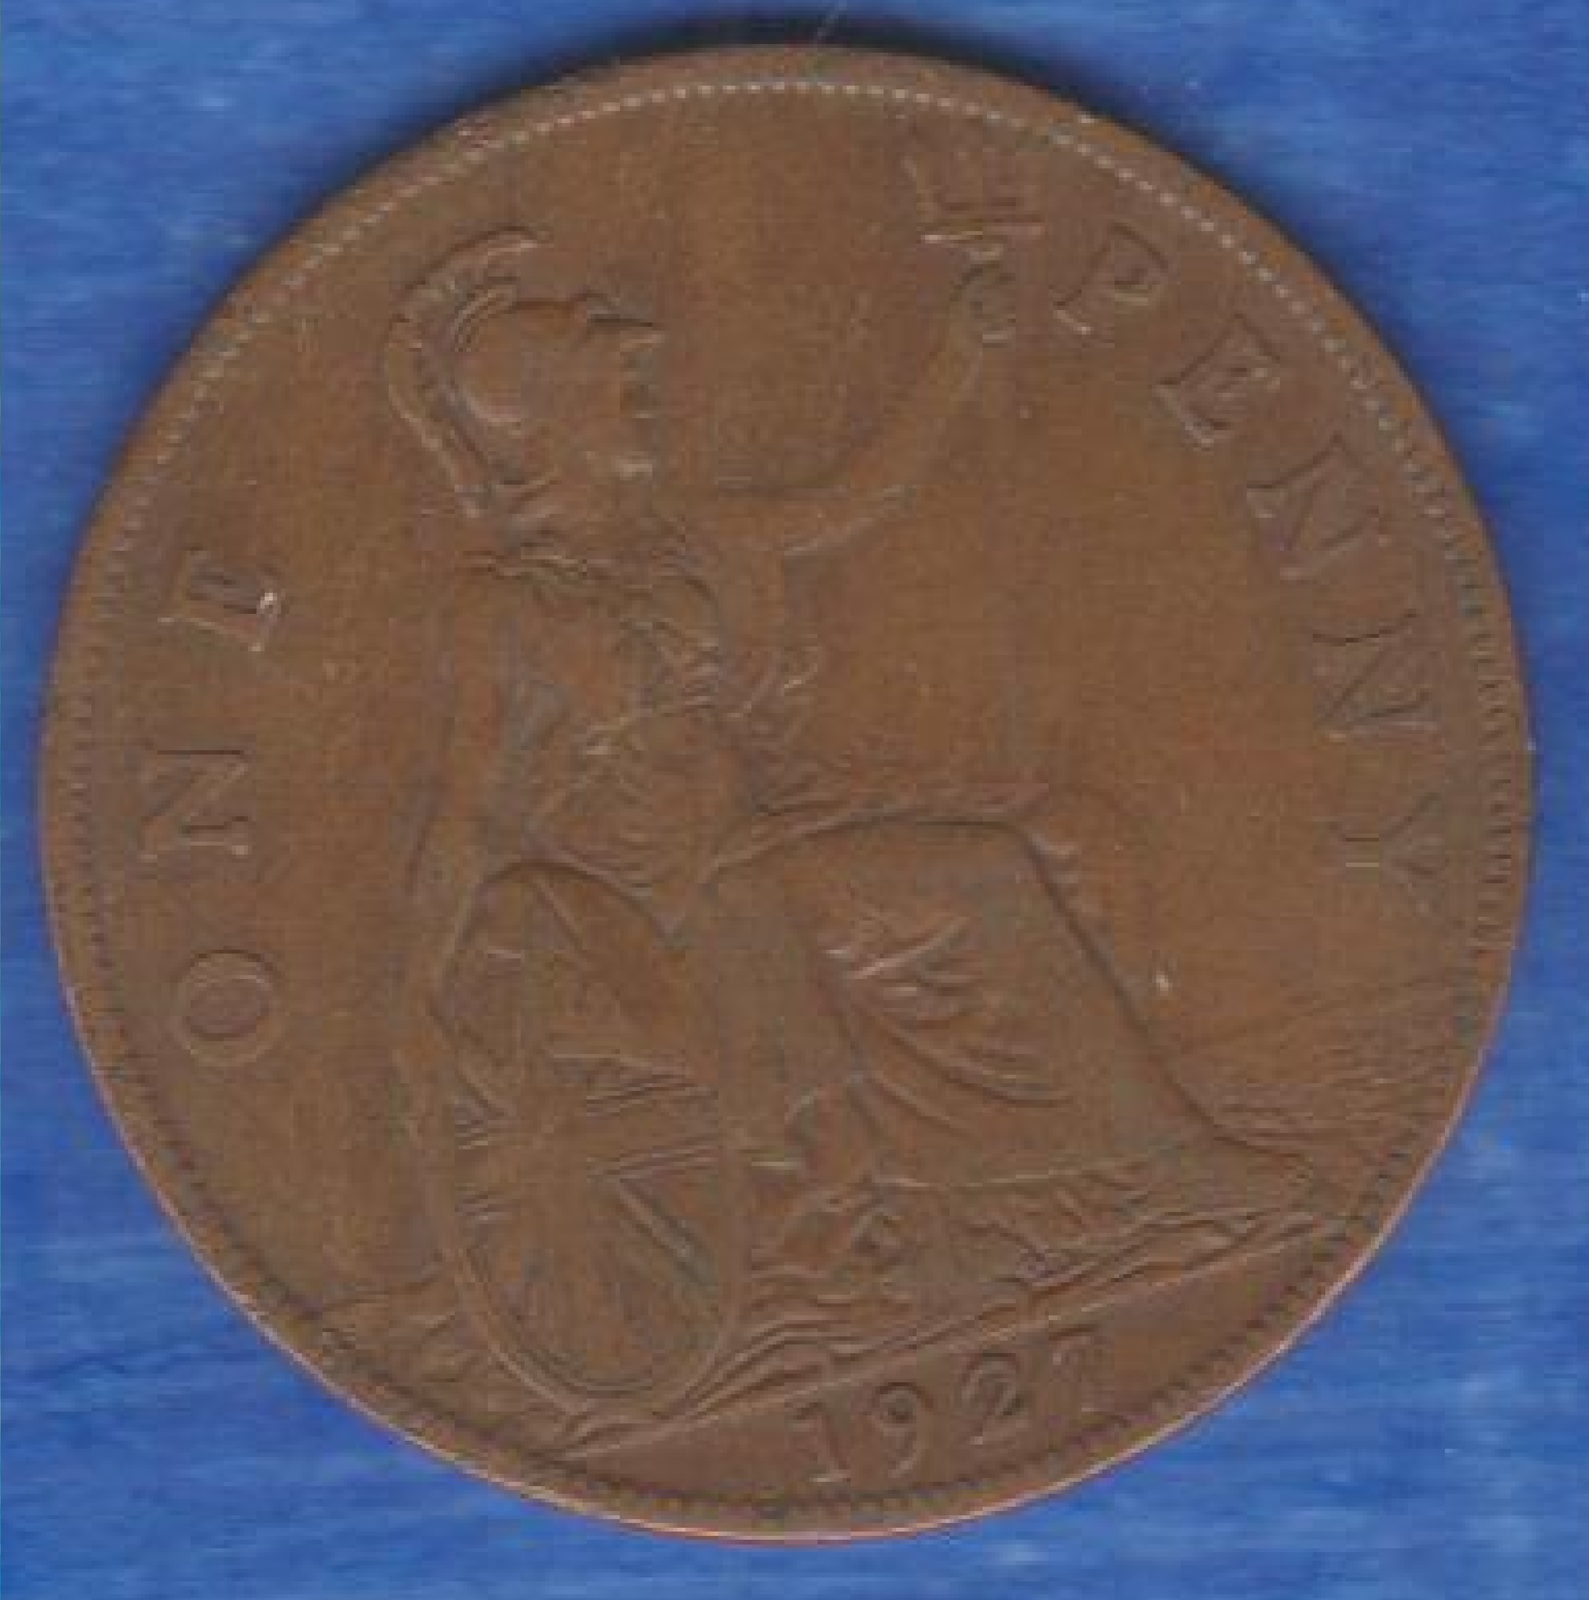 Primary image for 1927 King George V British UK large Penny coin Peace Age 96 years old KM#838 Buy